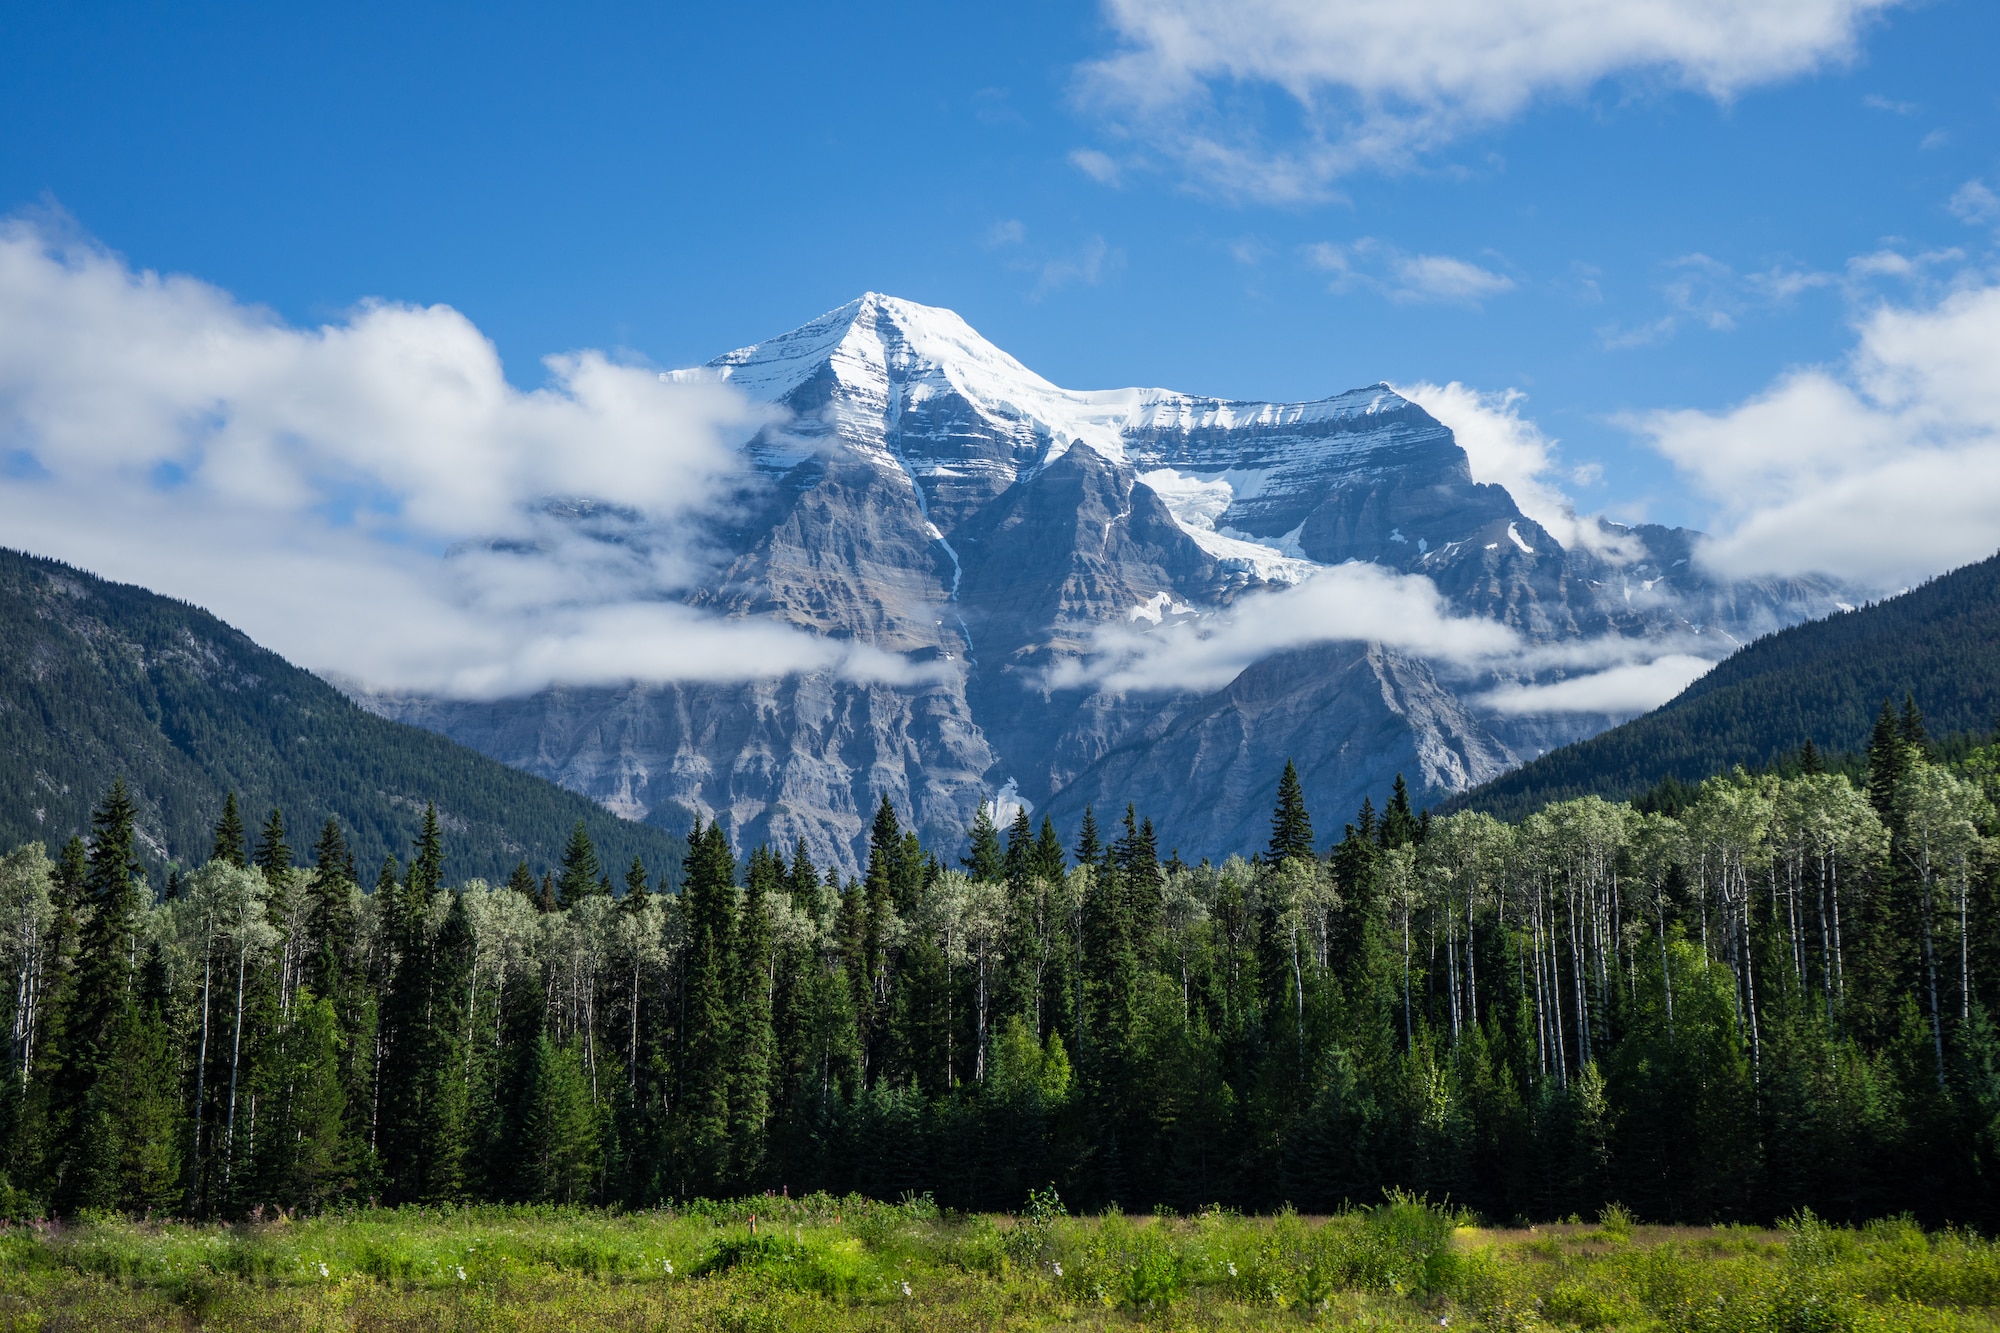 View of Mount Robson on a clear bluebird day